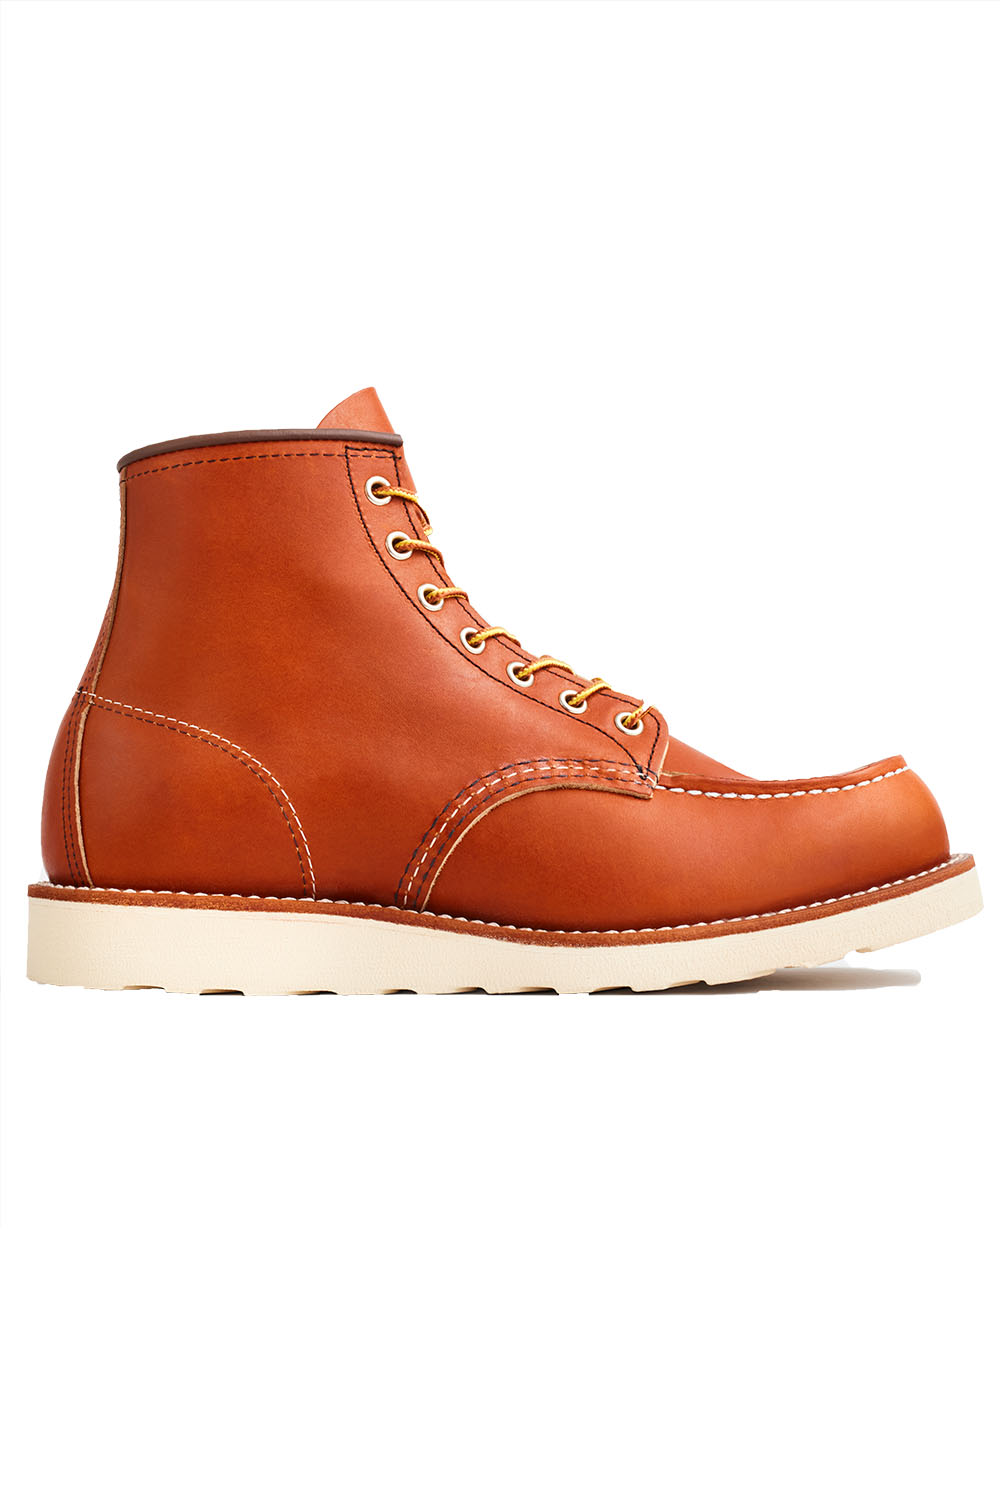 Red Wing - 6 Inch Moc Toe - Oro Legacy - Side